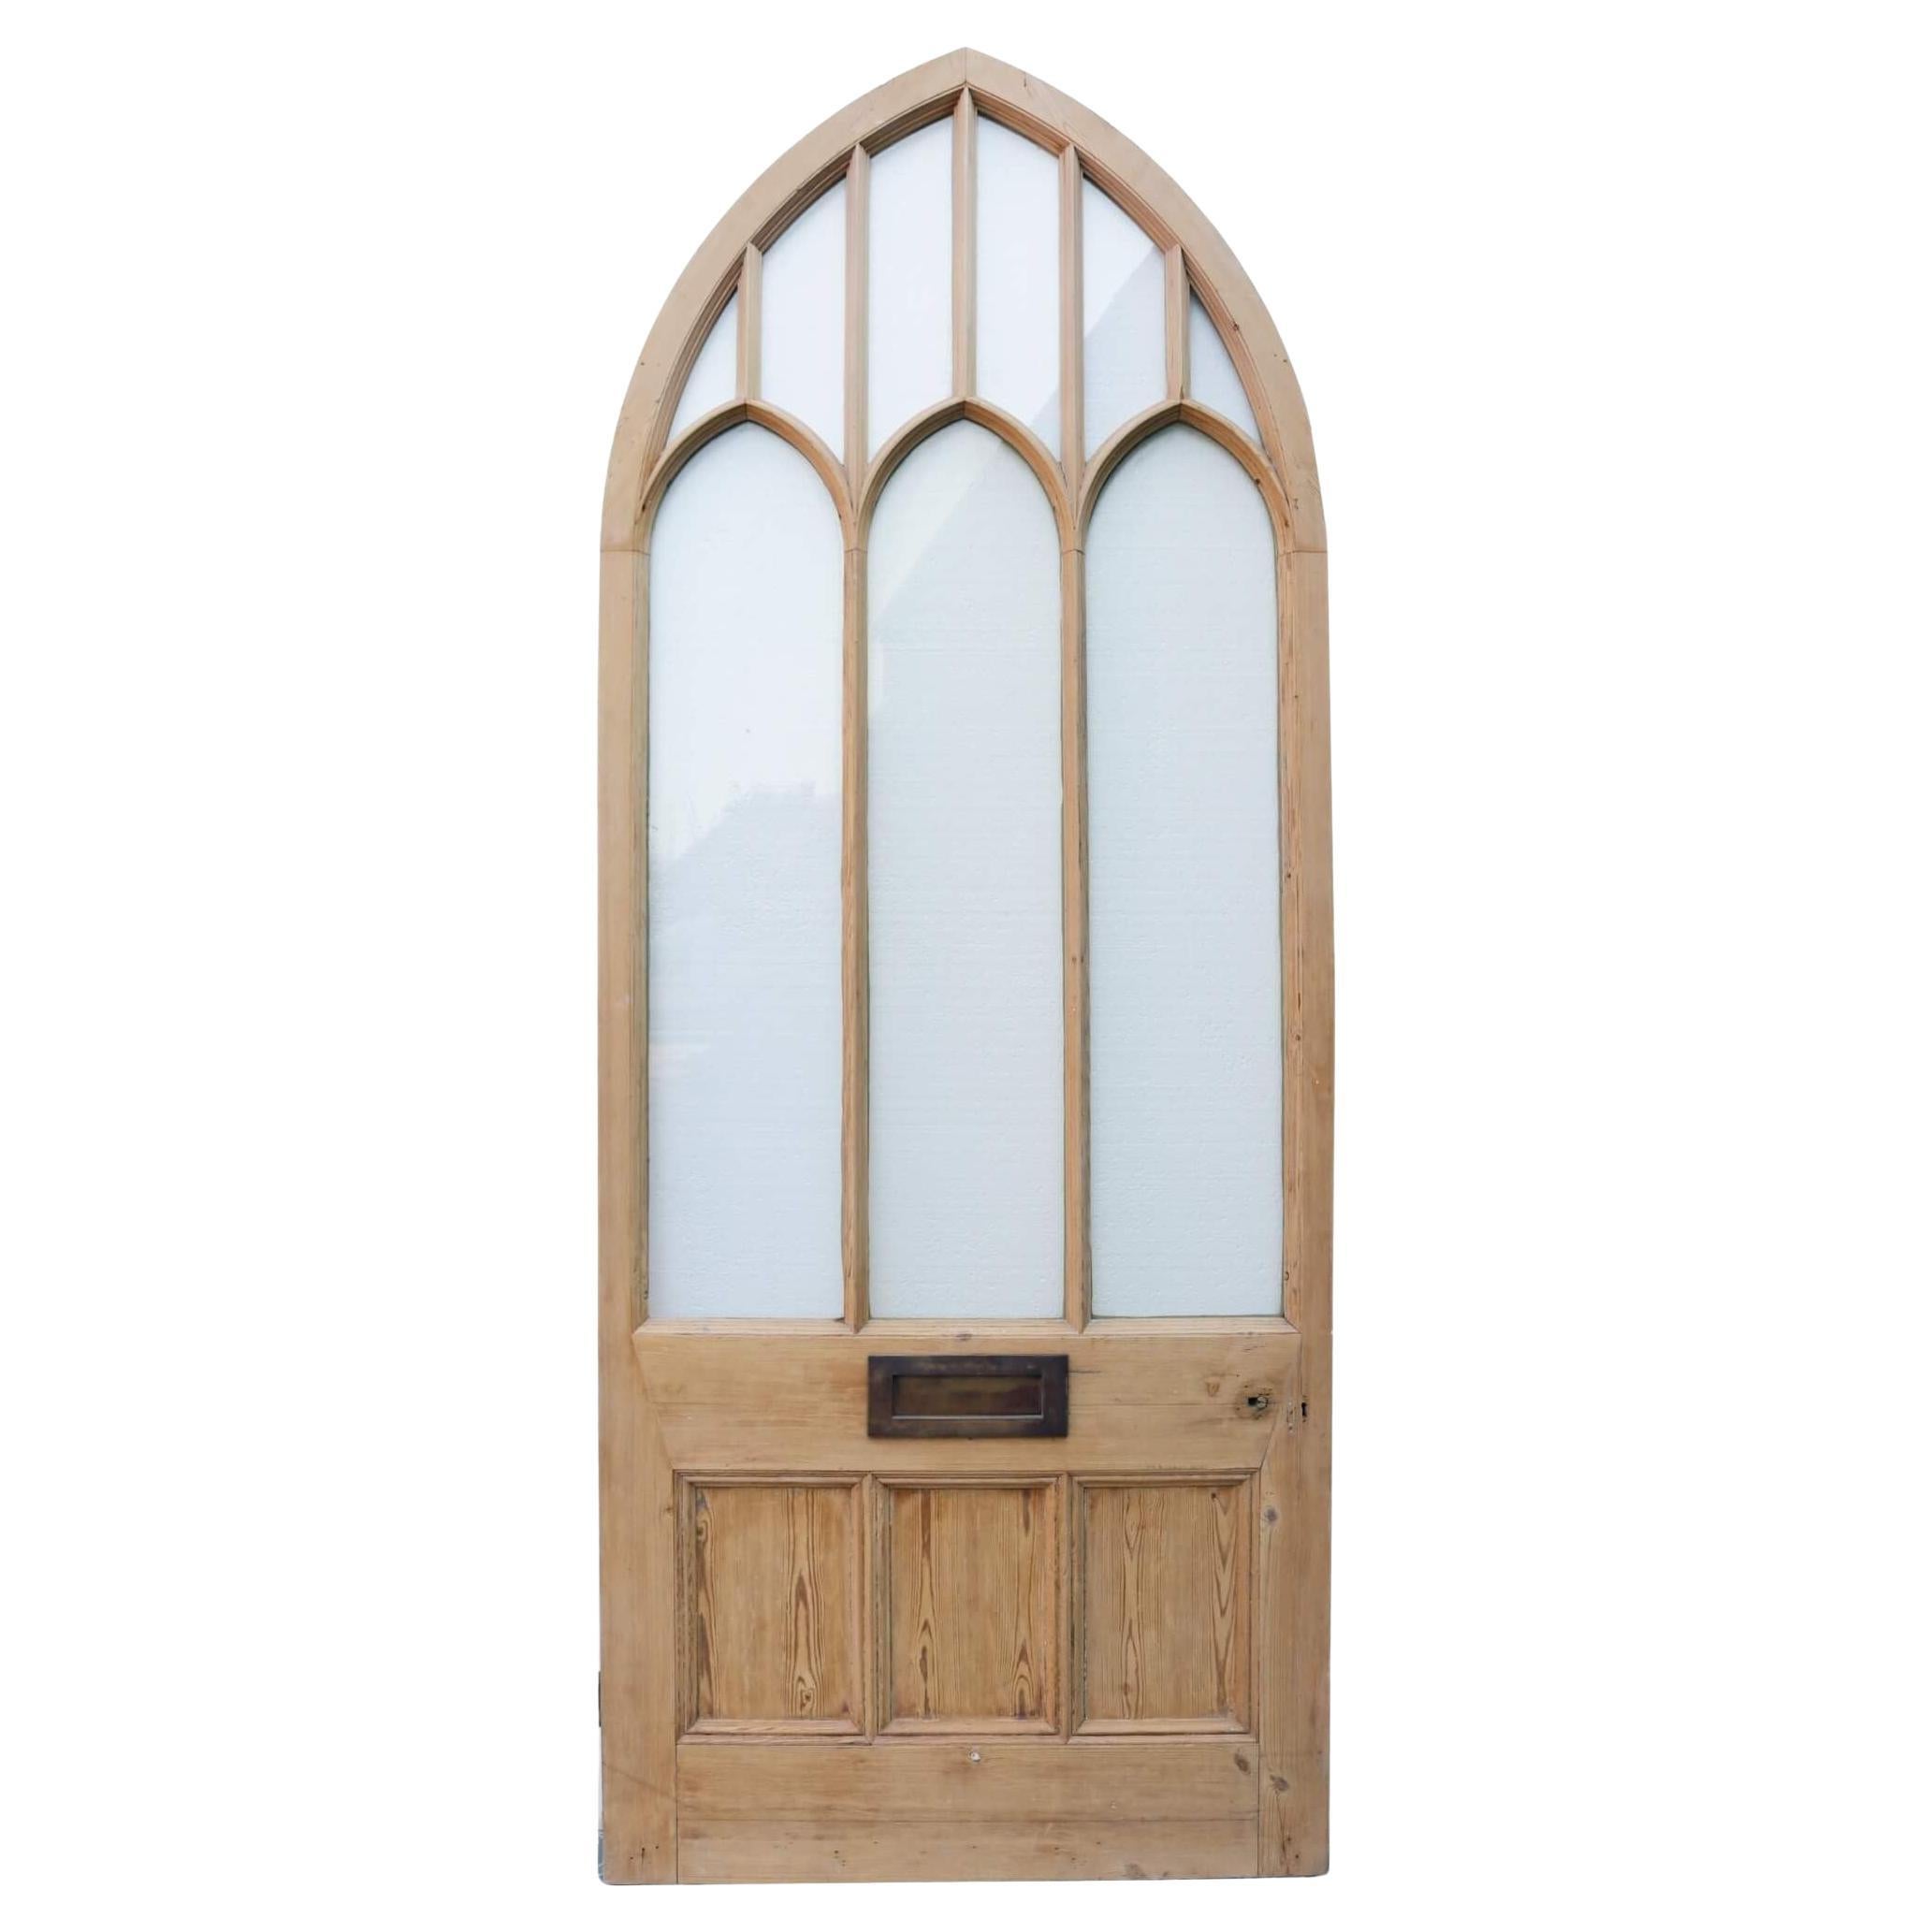 Large Glazed Victorian Arched Door For Sale